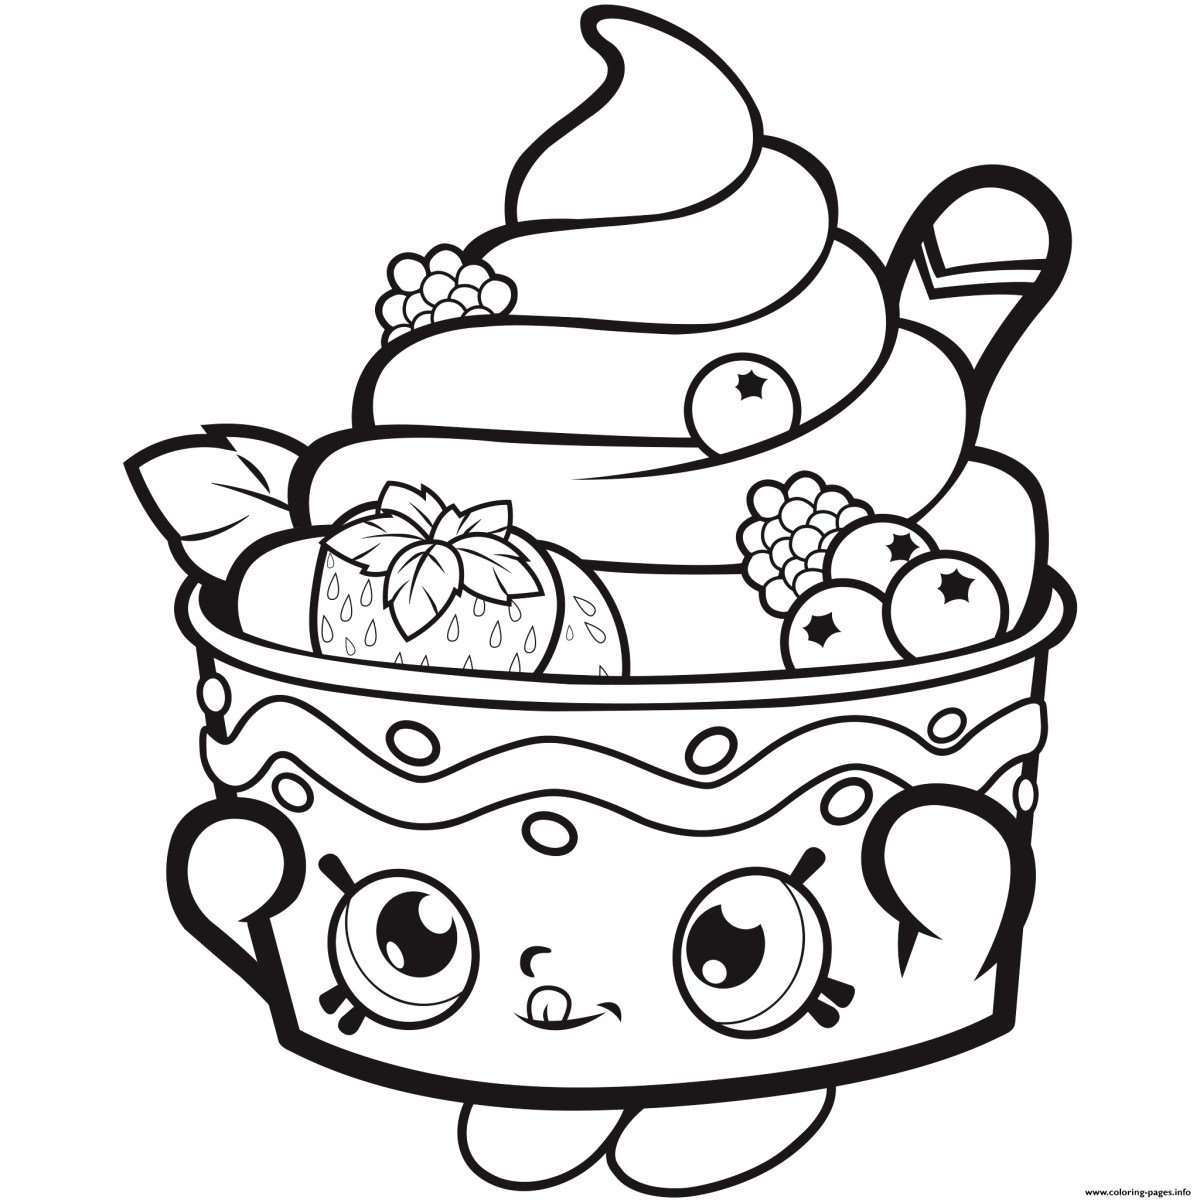 Ice Cream Coloring Pages Coloring Pages Ice Cream Shopkins Icecream  Strawberry Coloring Pages - birijus.com